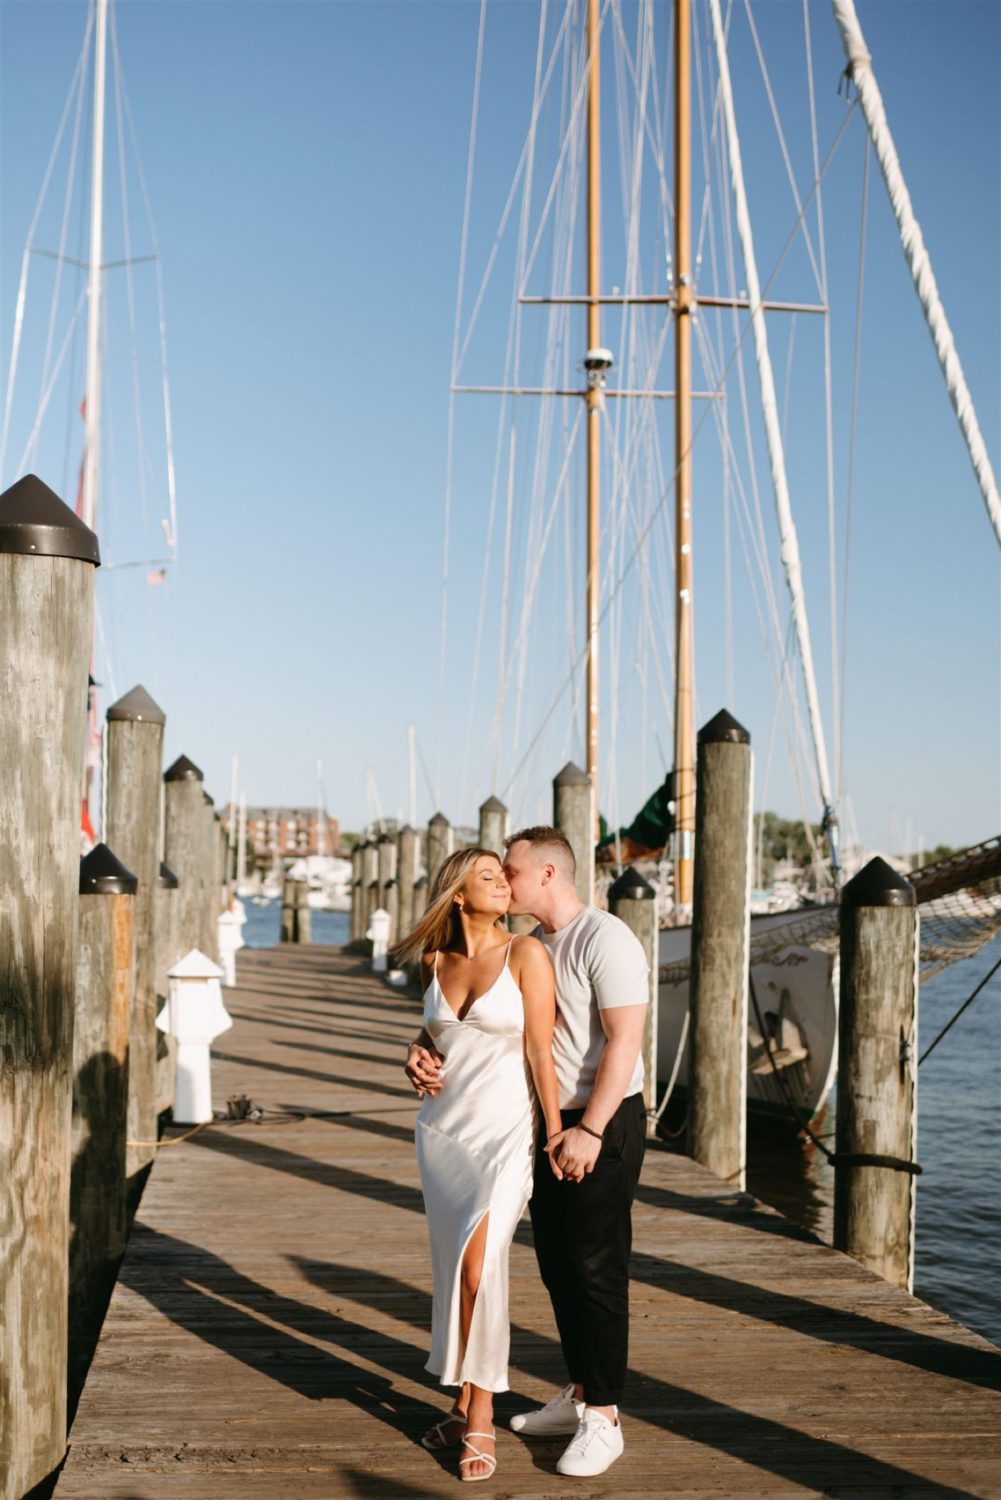 summer annapolis engagement guy kissing girl on cheek holding hands 